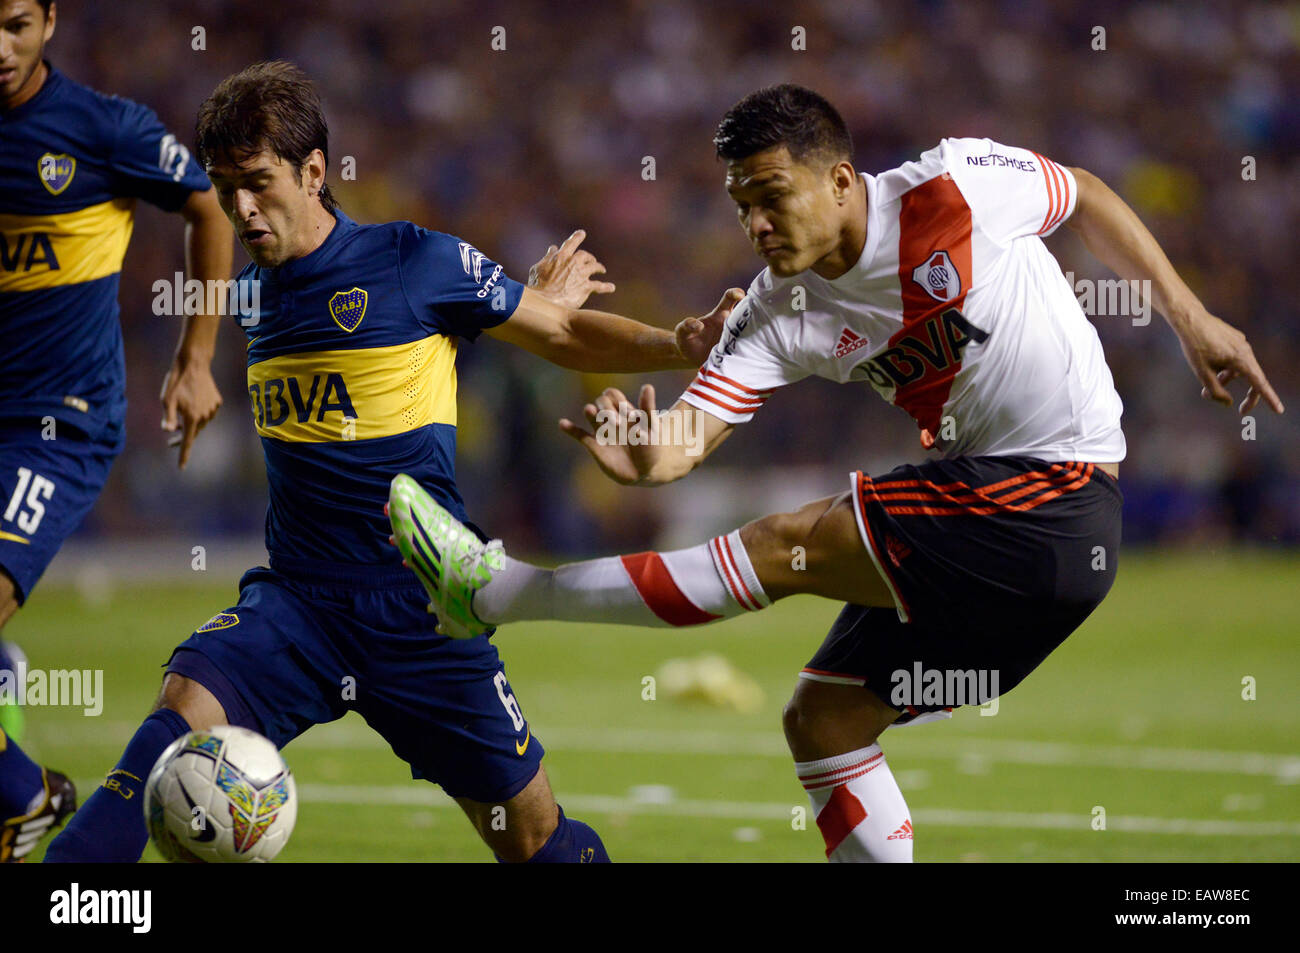 Buenos Aires, Argentina. 20th Nov, 2014. Boca Juniors' Juan Daniel Forlin (L) vies the ball with Teofilo Gutierrez of River Plate during the first leg match of South American Cup semifinals, held at Alberto J. Armando stadium, in Buenos Aires, Argentina, on Nov. 20, 2014. © Leo La Valle/Xinhua/Alamy Live News Stock Photo